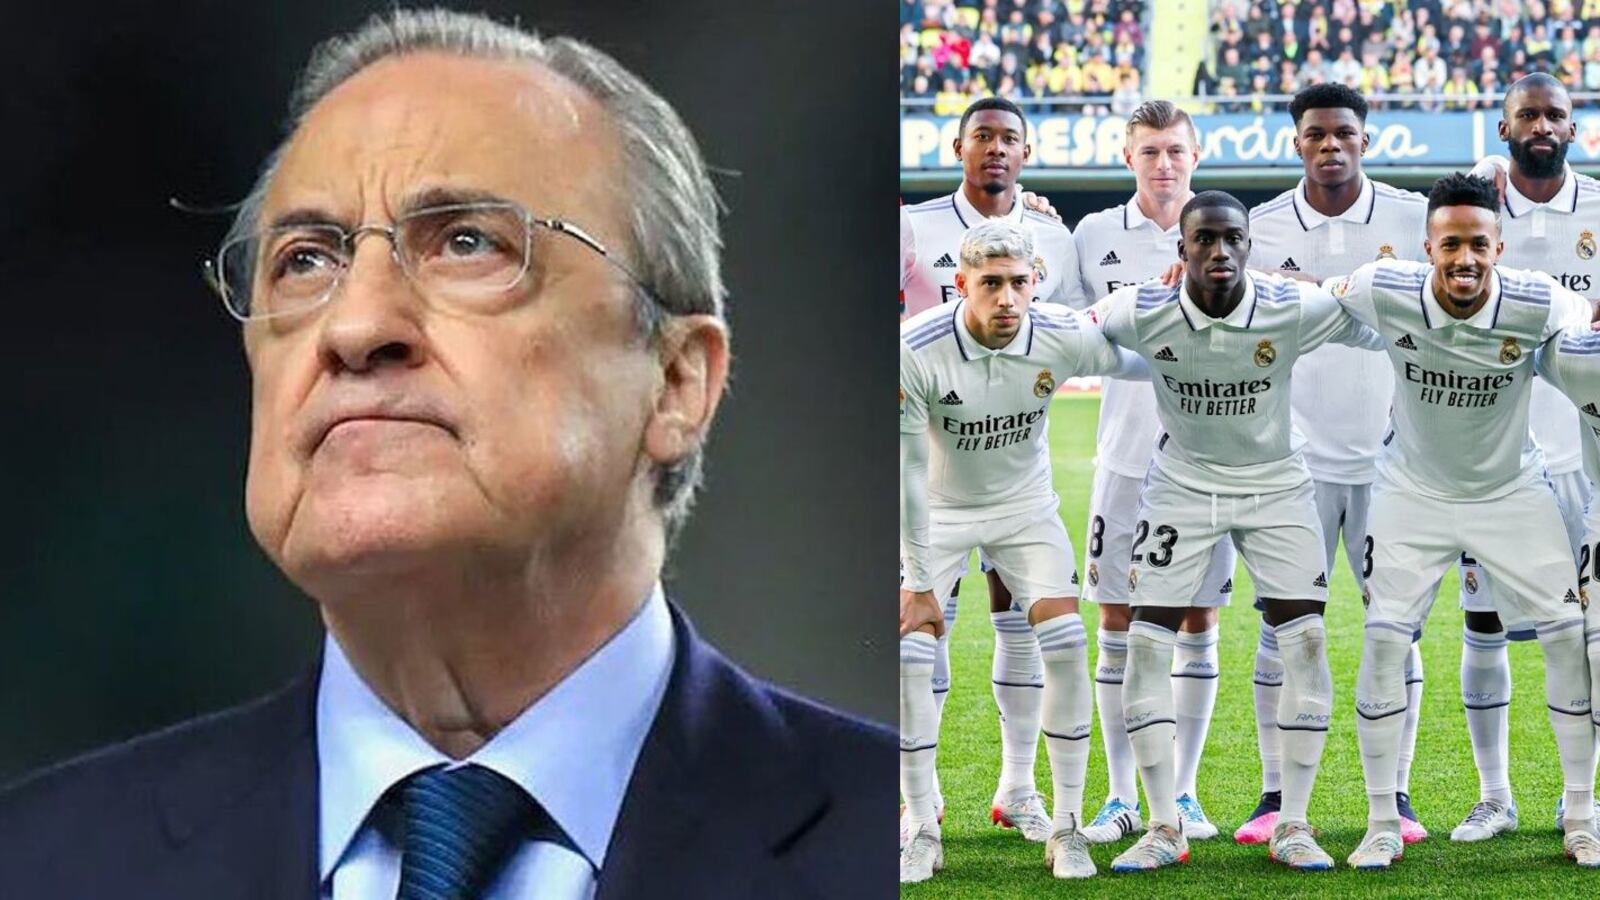 The worst news that Real Madrid receives a few days before facing Barcelona